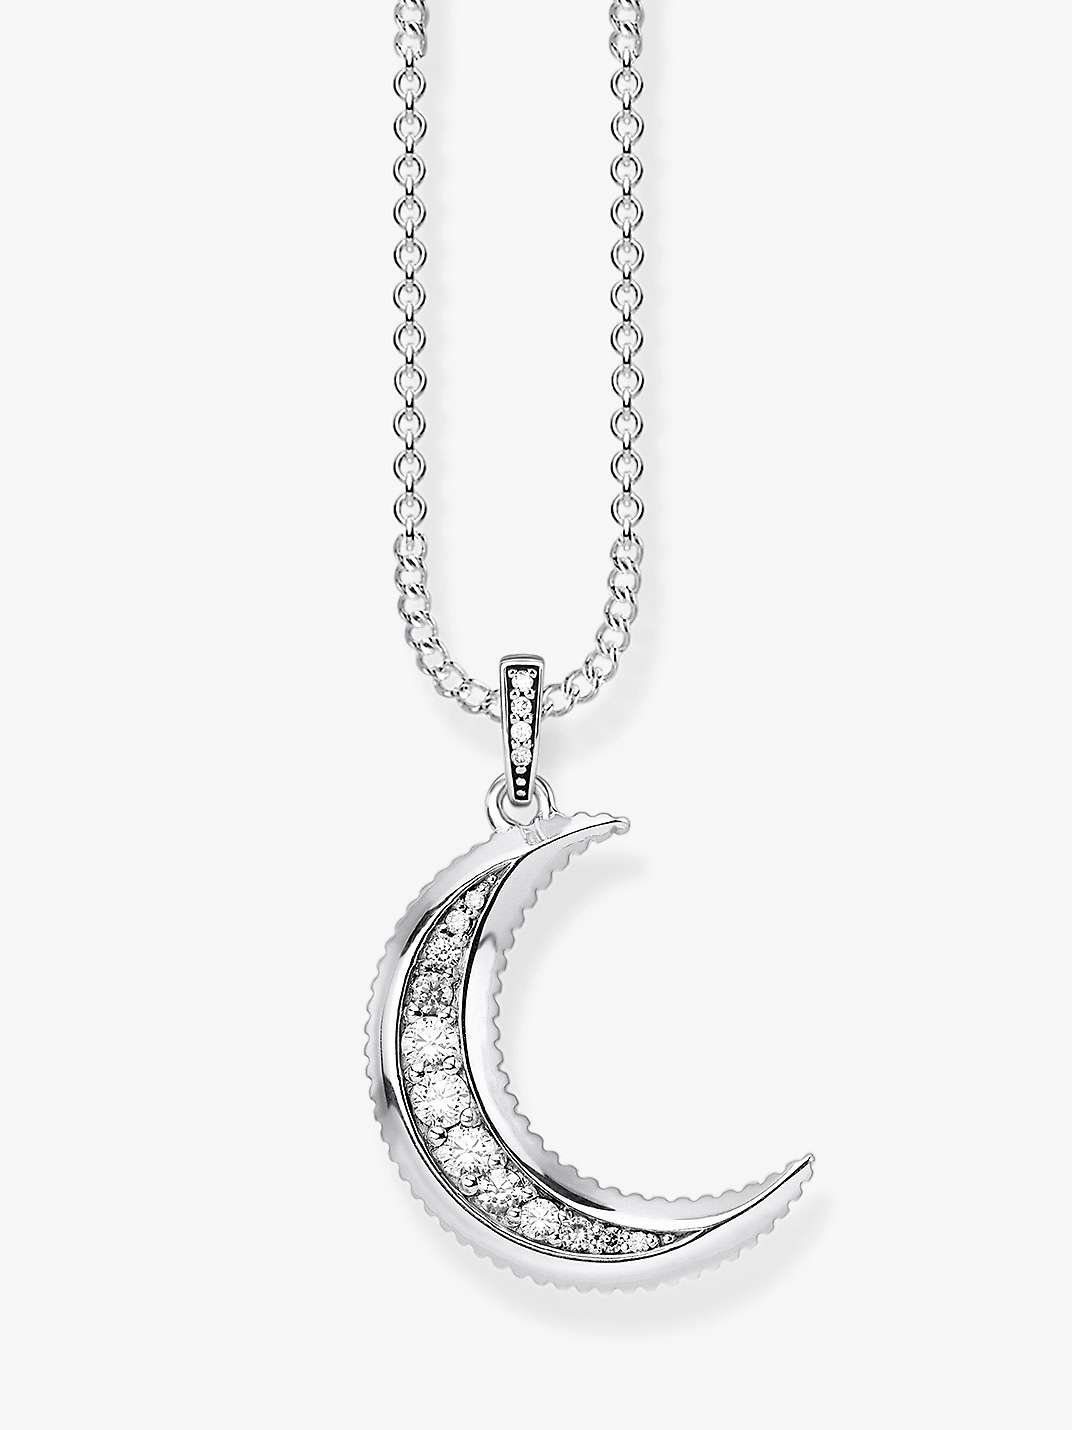 Buy THOMAS SABO Glam & Soul Crystal Crescent Moon Pendant Necklace, Silver Online at johnlewis.com